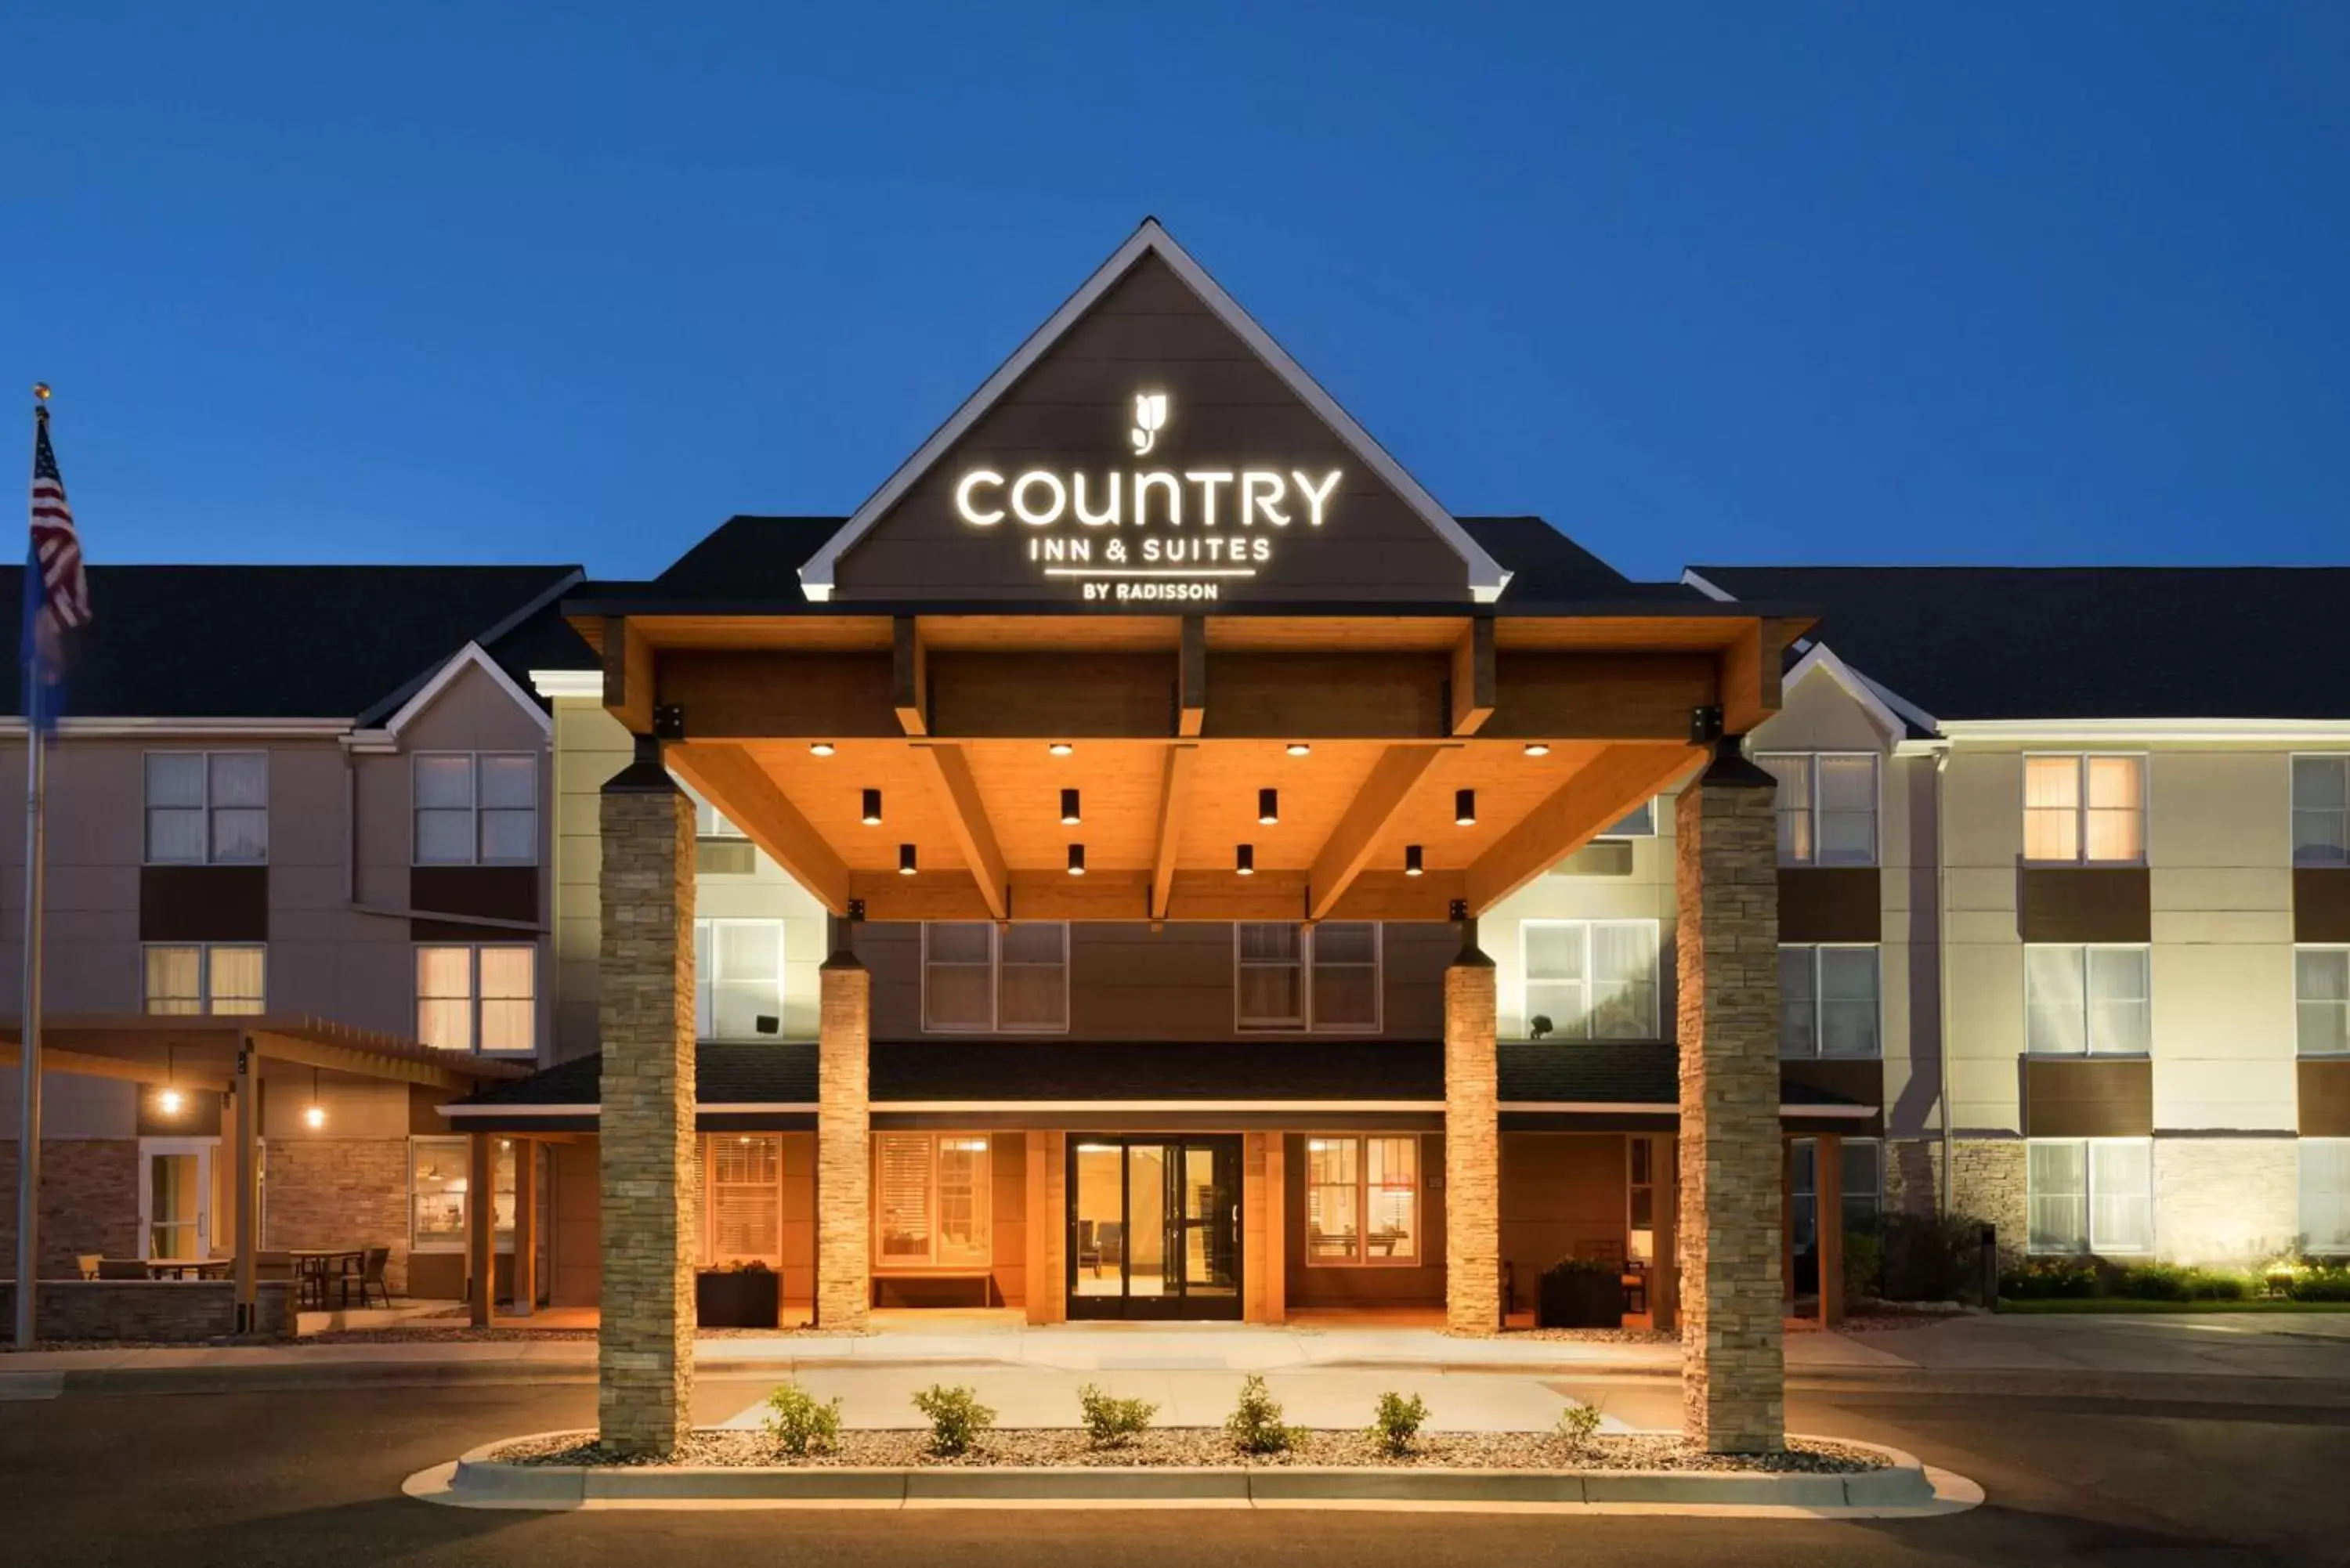 Property building in Country Inn & Suites by Radisson, Minneapolis West, MN